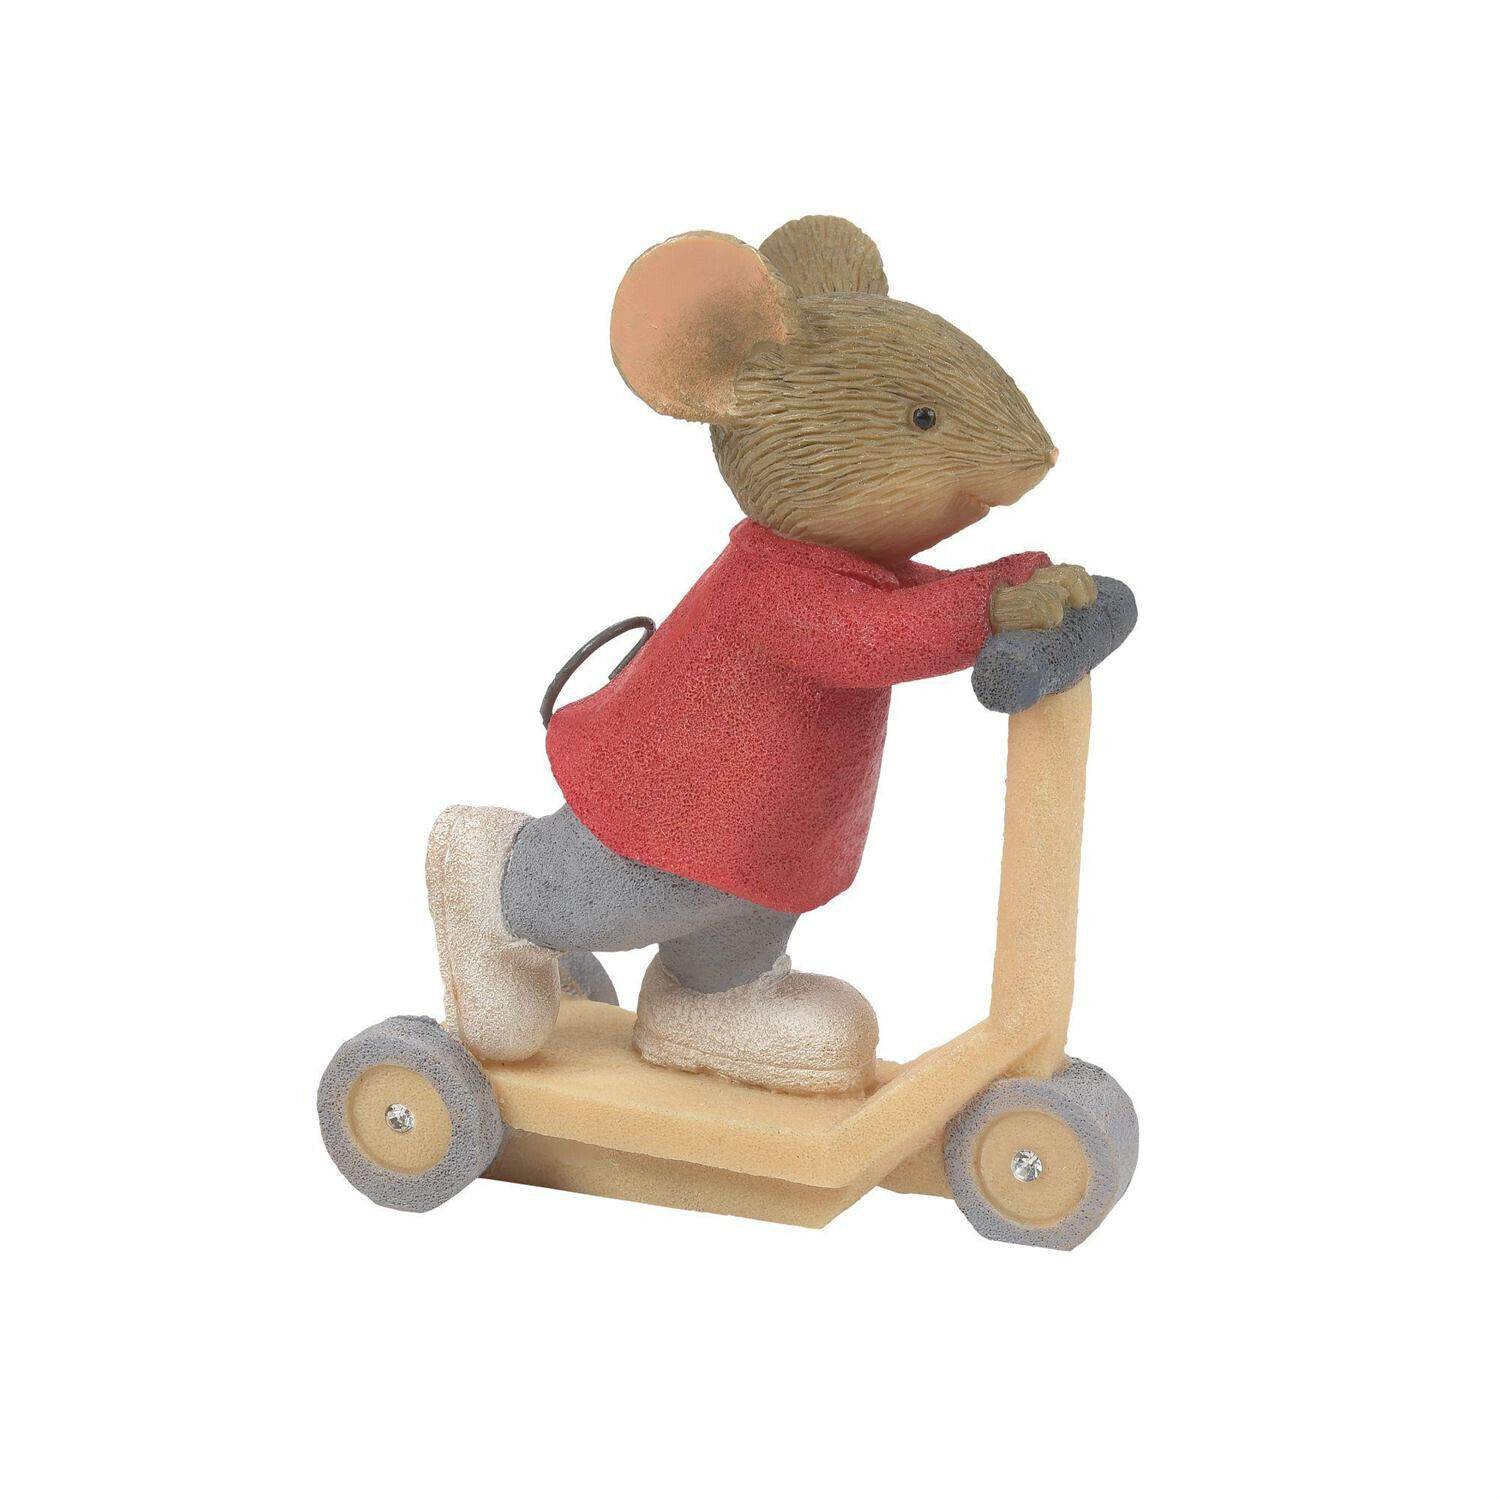 Enesco Tails with Heart SCOOTER SPEED Mouse Outdoor Activities 6012047